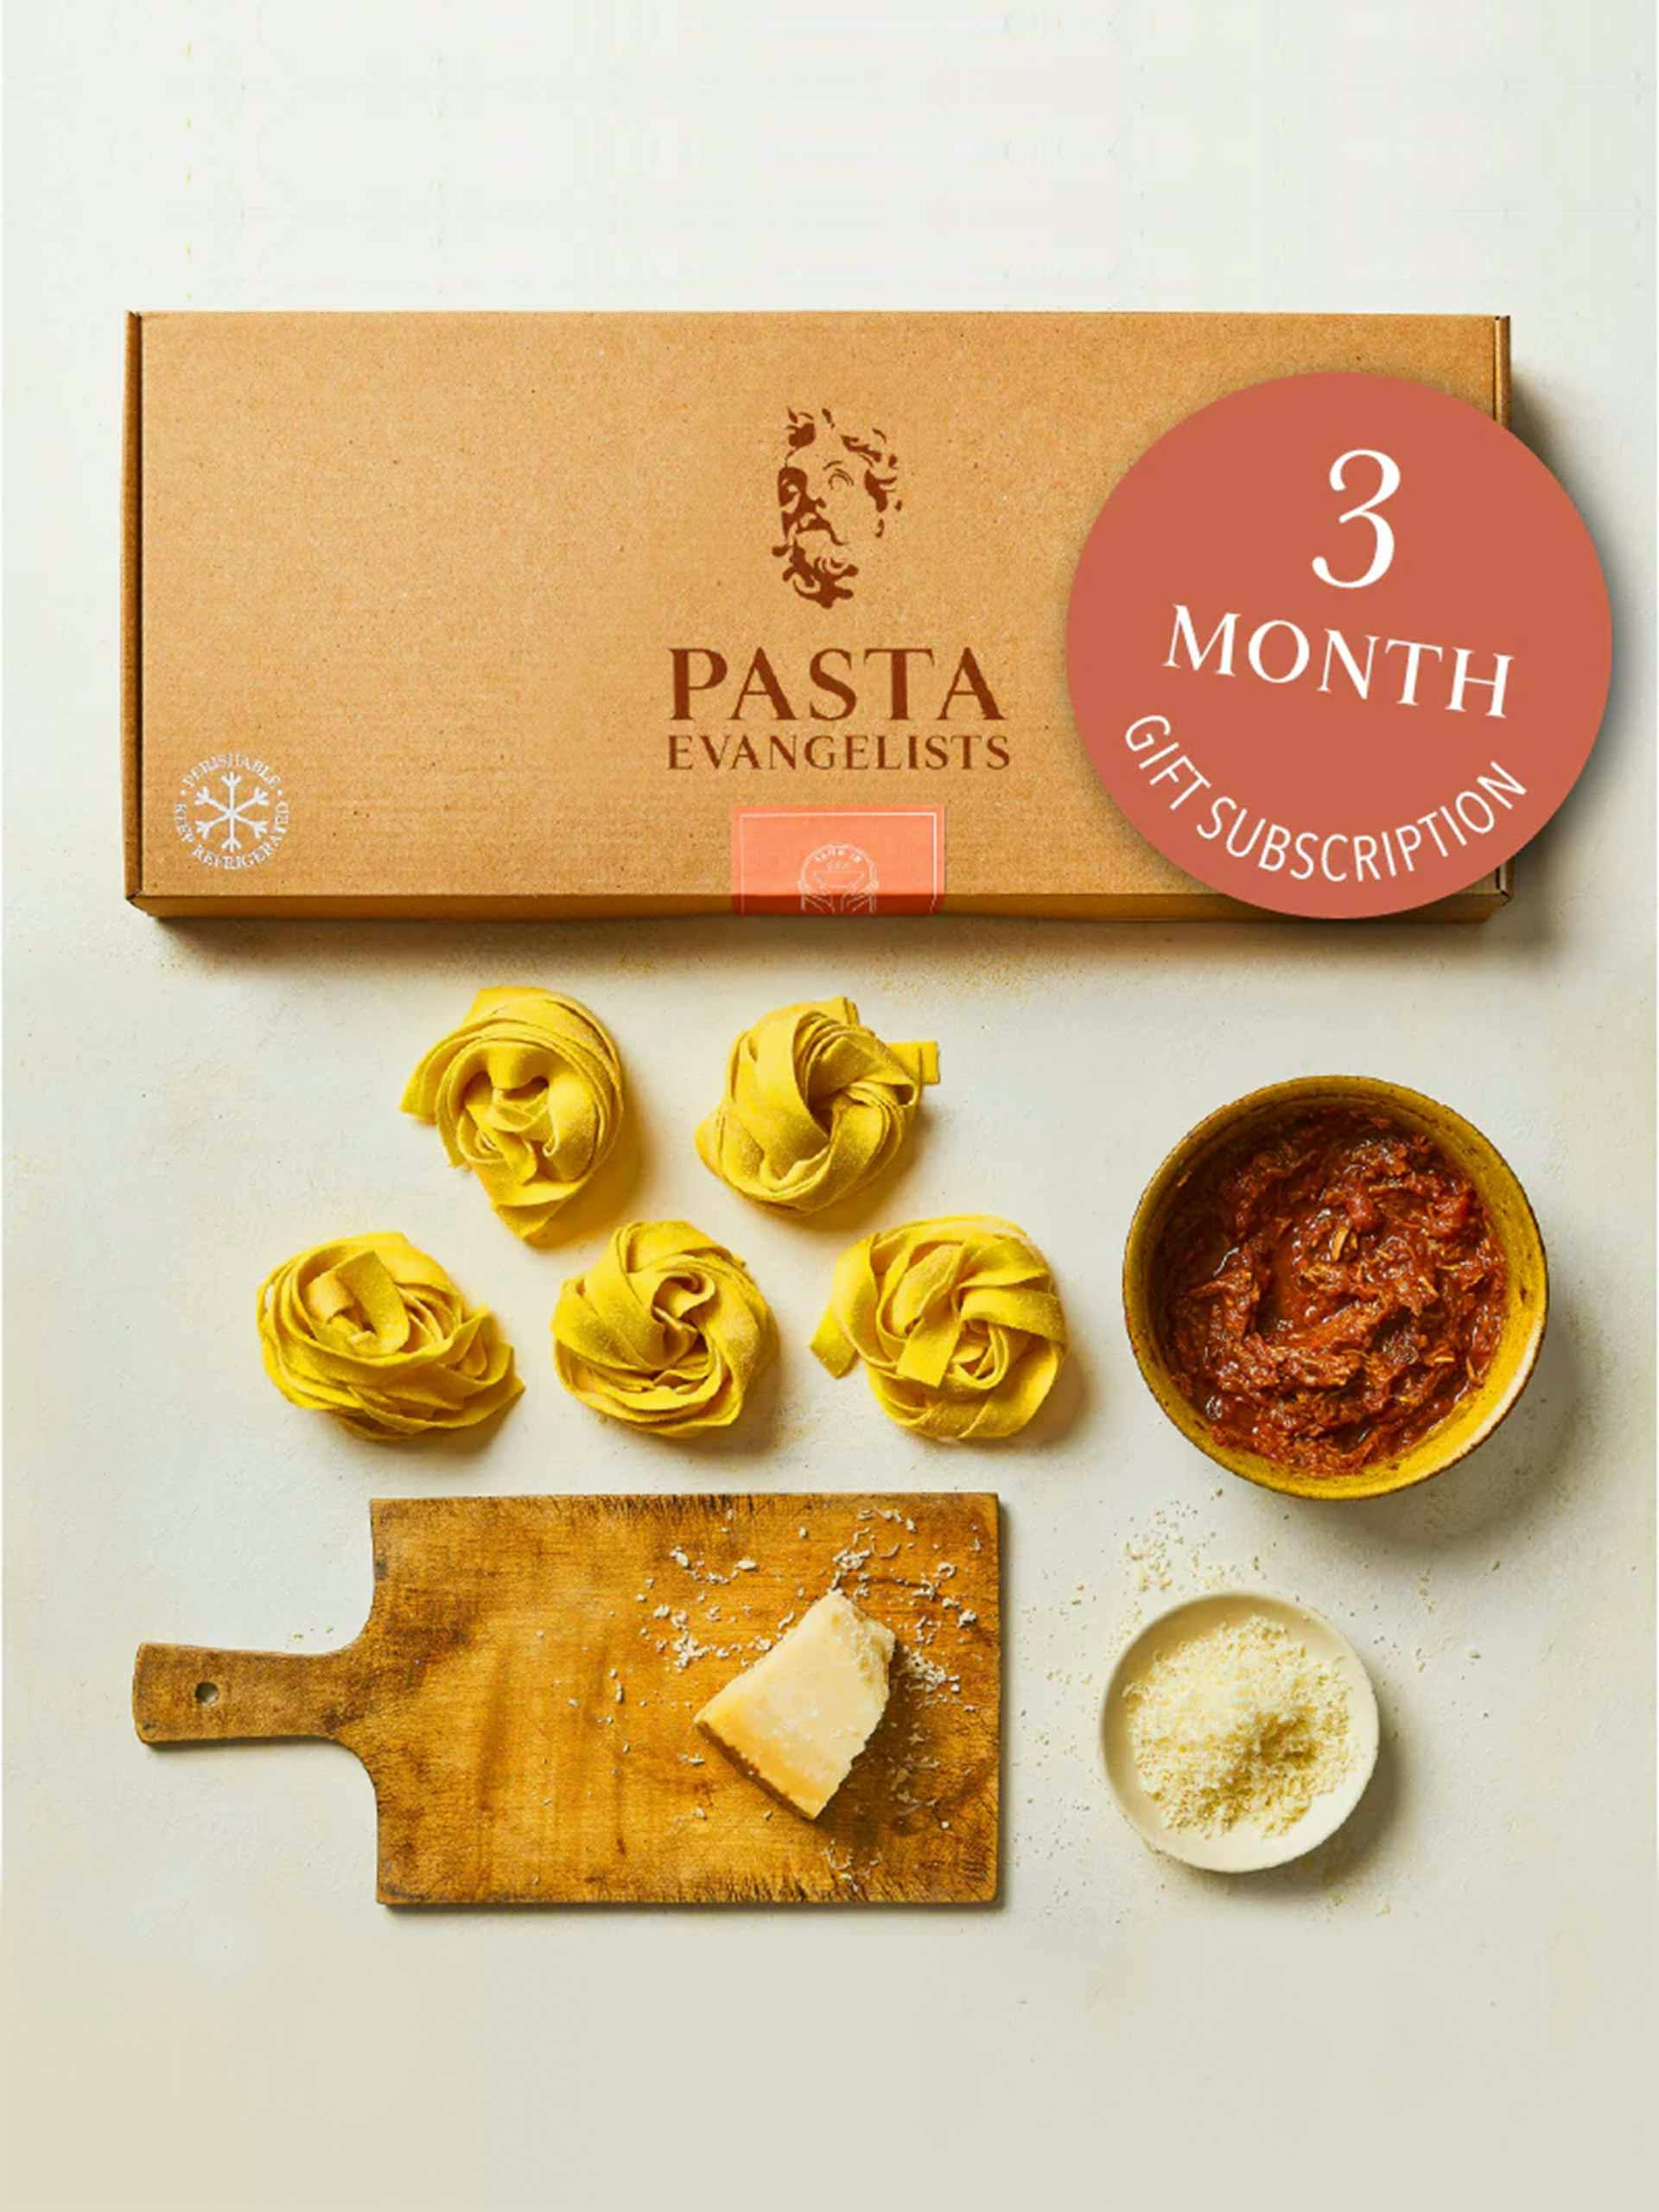 Pasta Evangelists 3-month gift subscription